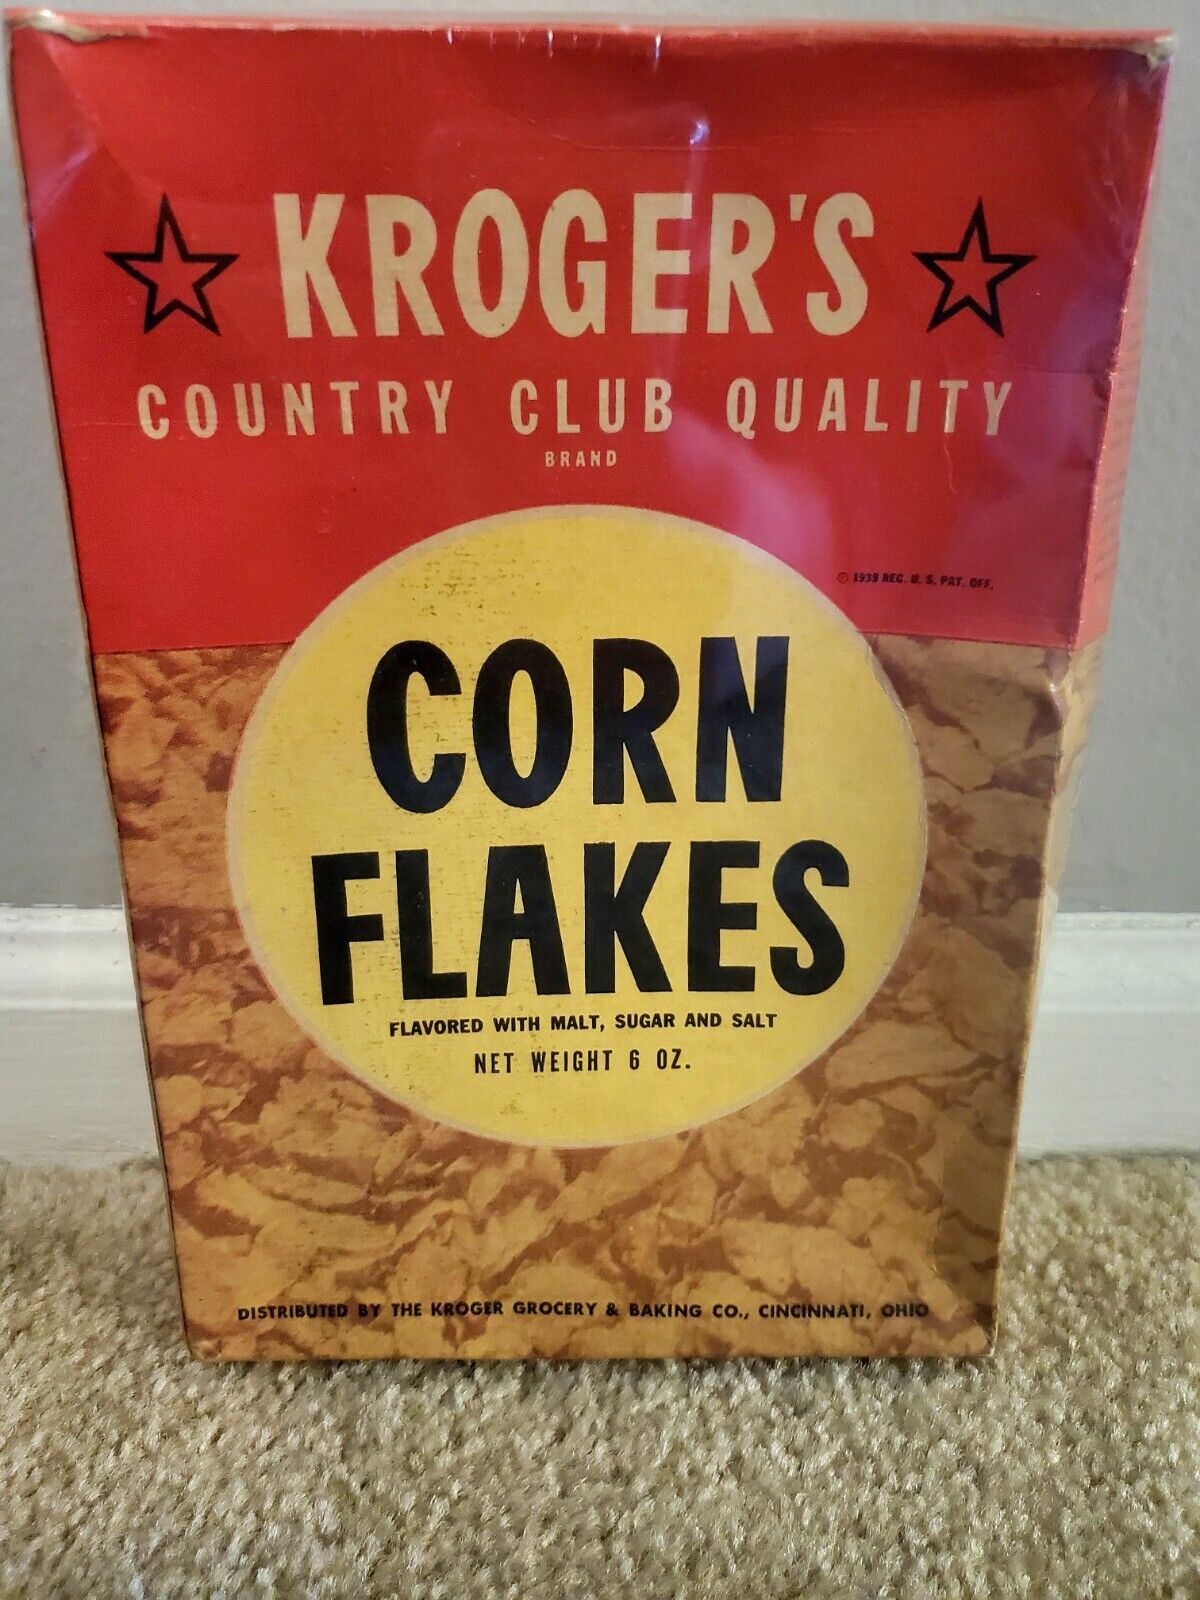 Vintage KROGER Corn Flakes Box 1939 The Kroger Grocery And Baking Co.